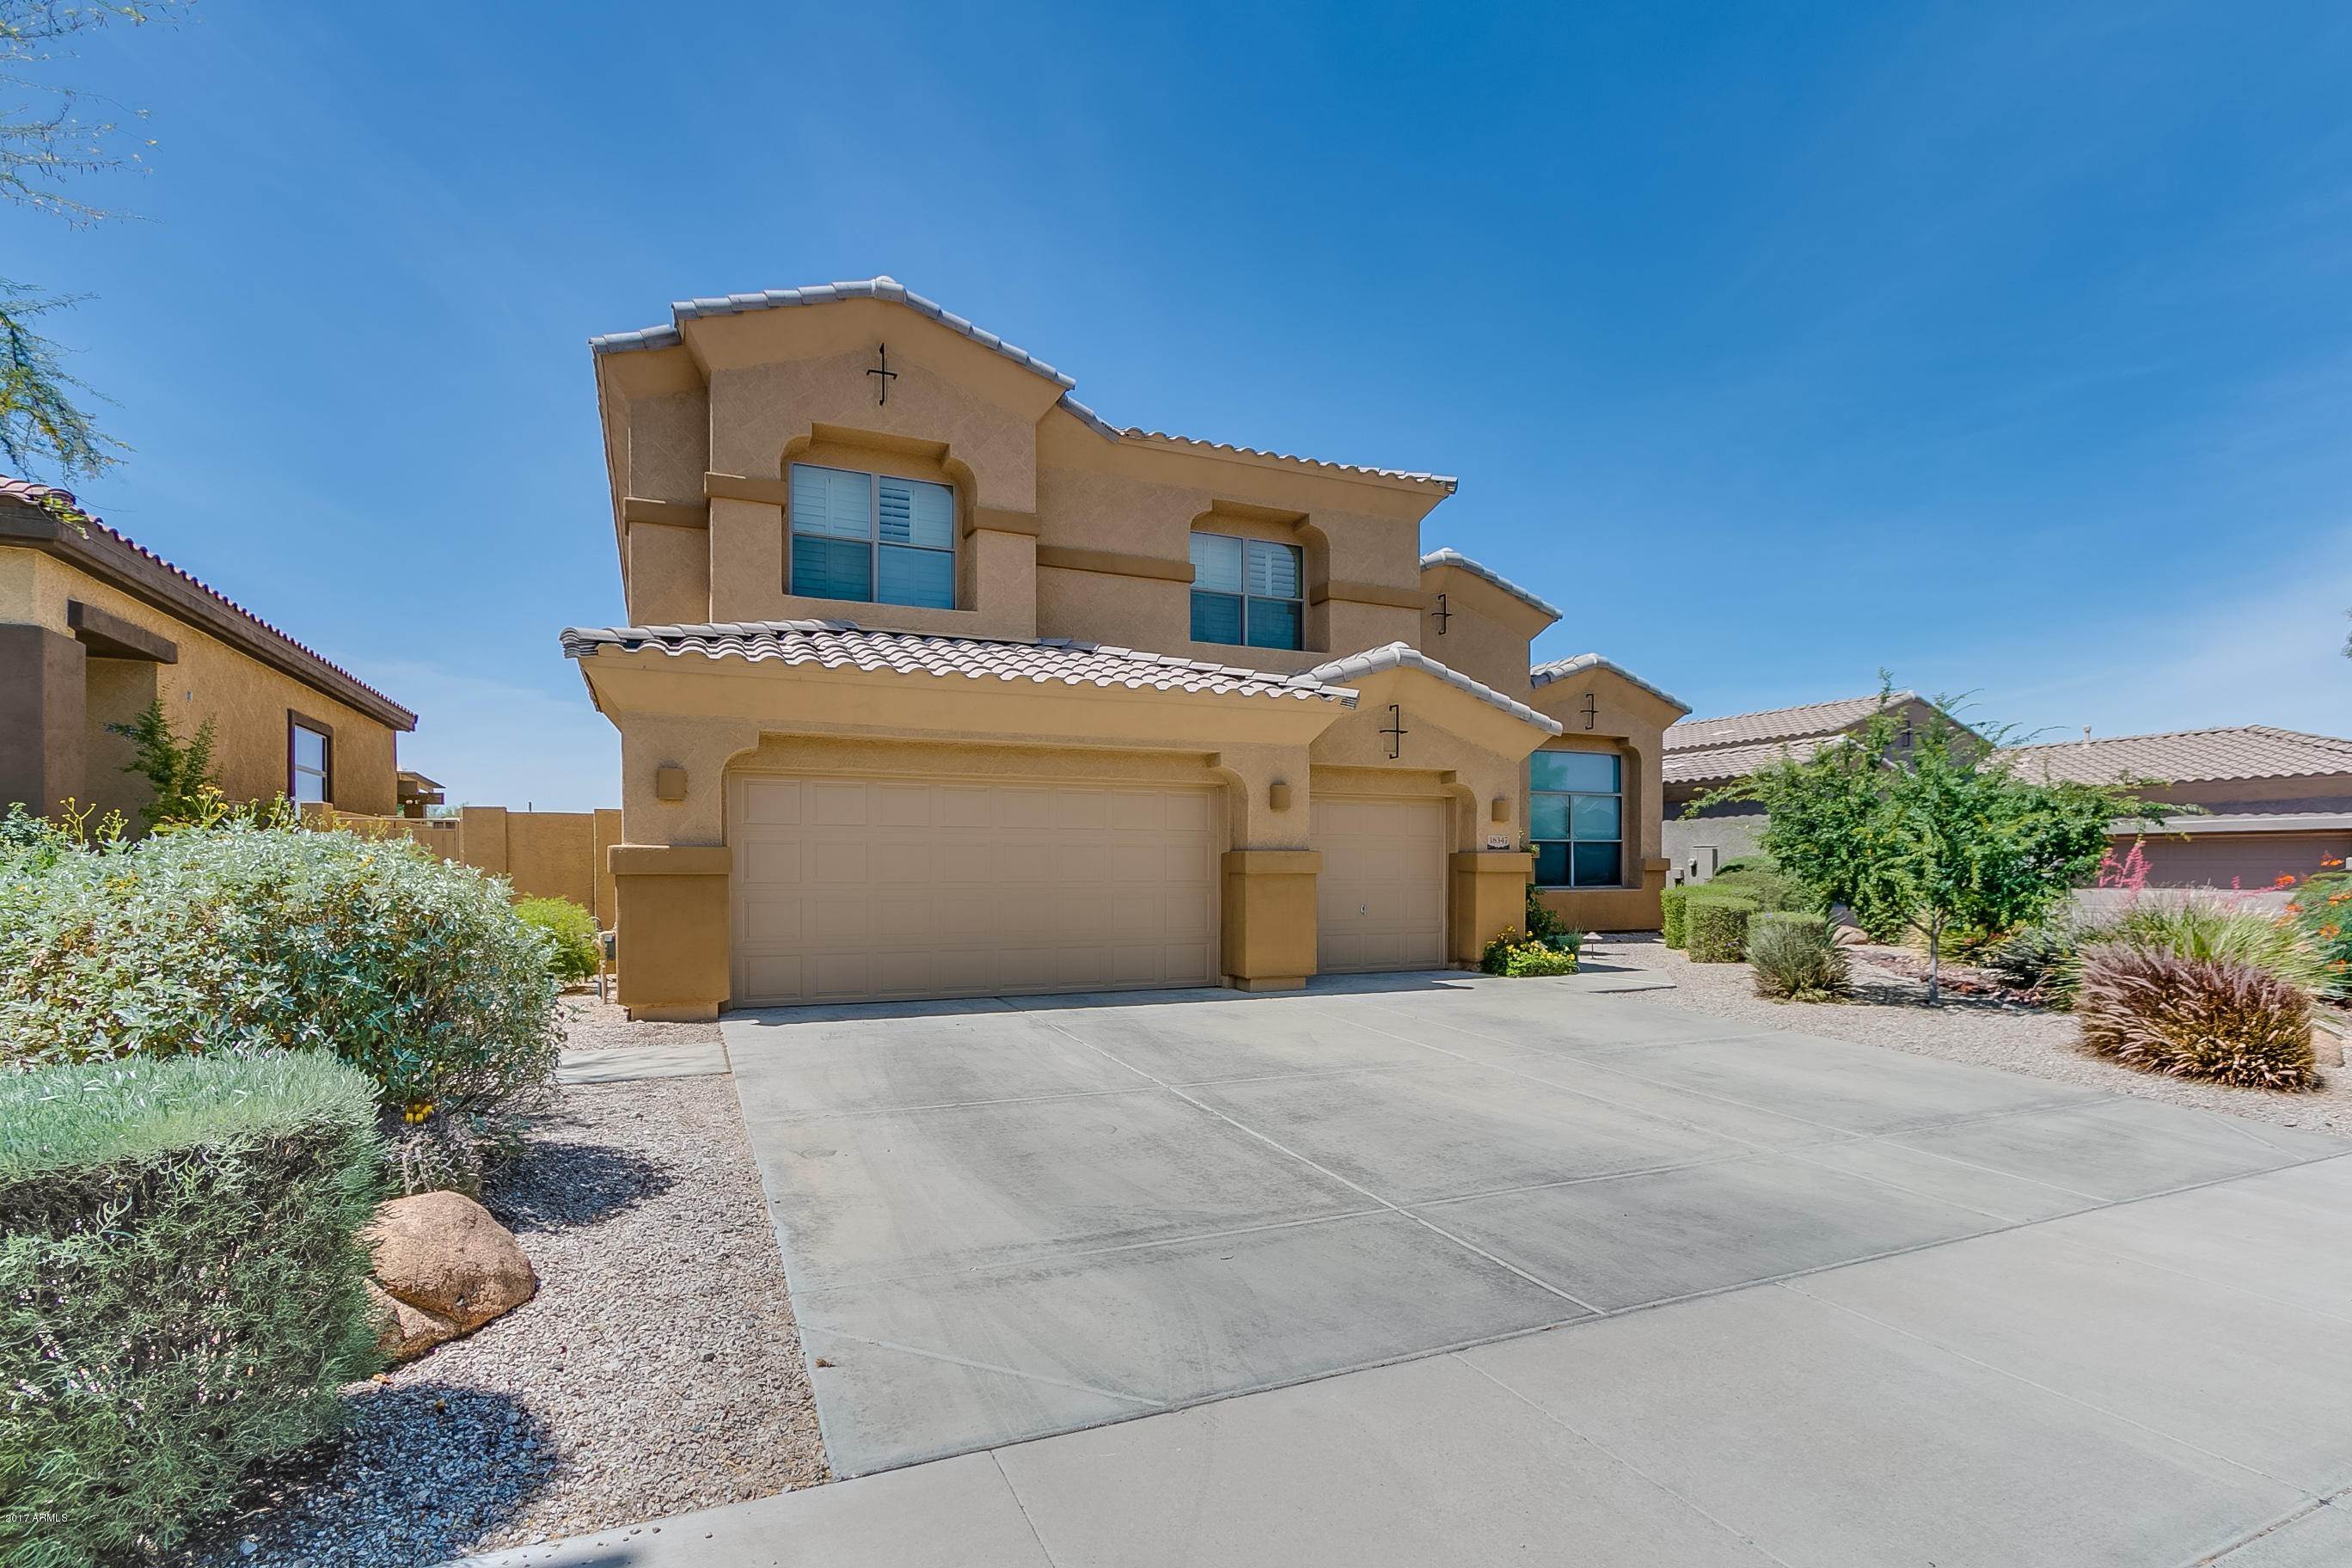 5. Single Family for Sale at Goodyear, AZ 85338